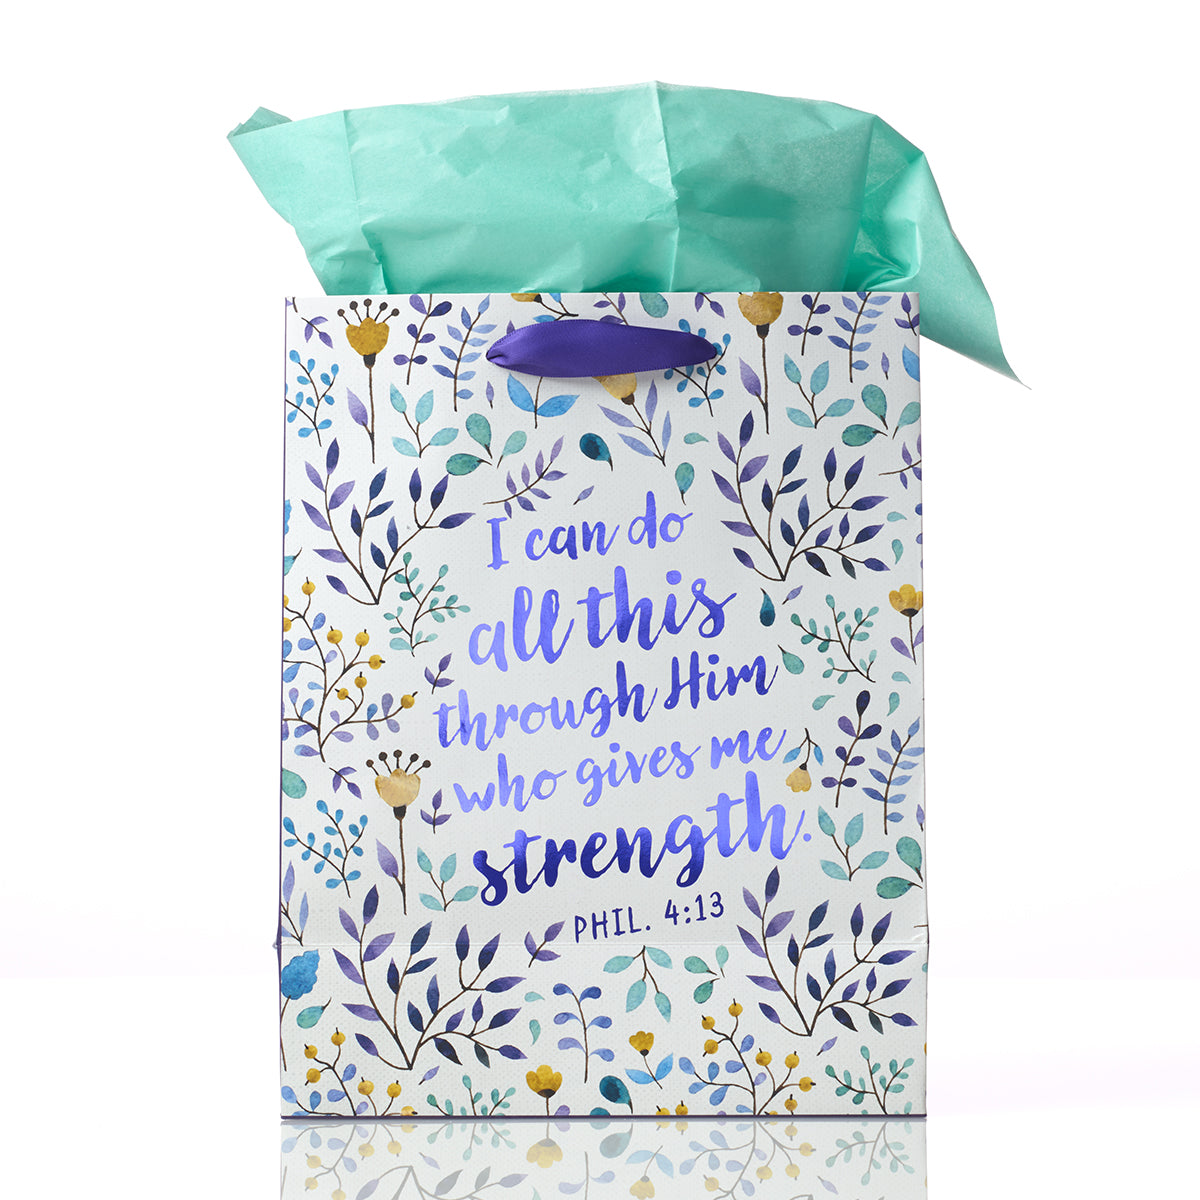 I Can Do All This - Phil 4:13 Medium Gift Bag - The Christian Gift Company